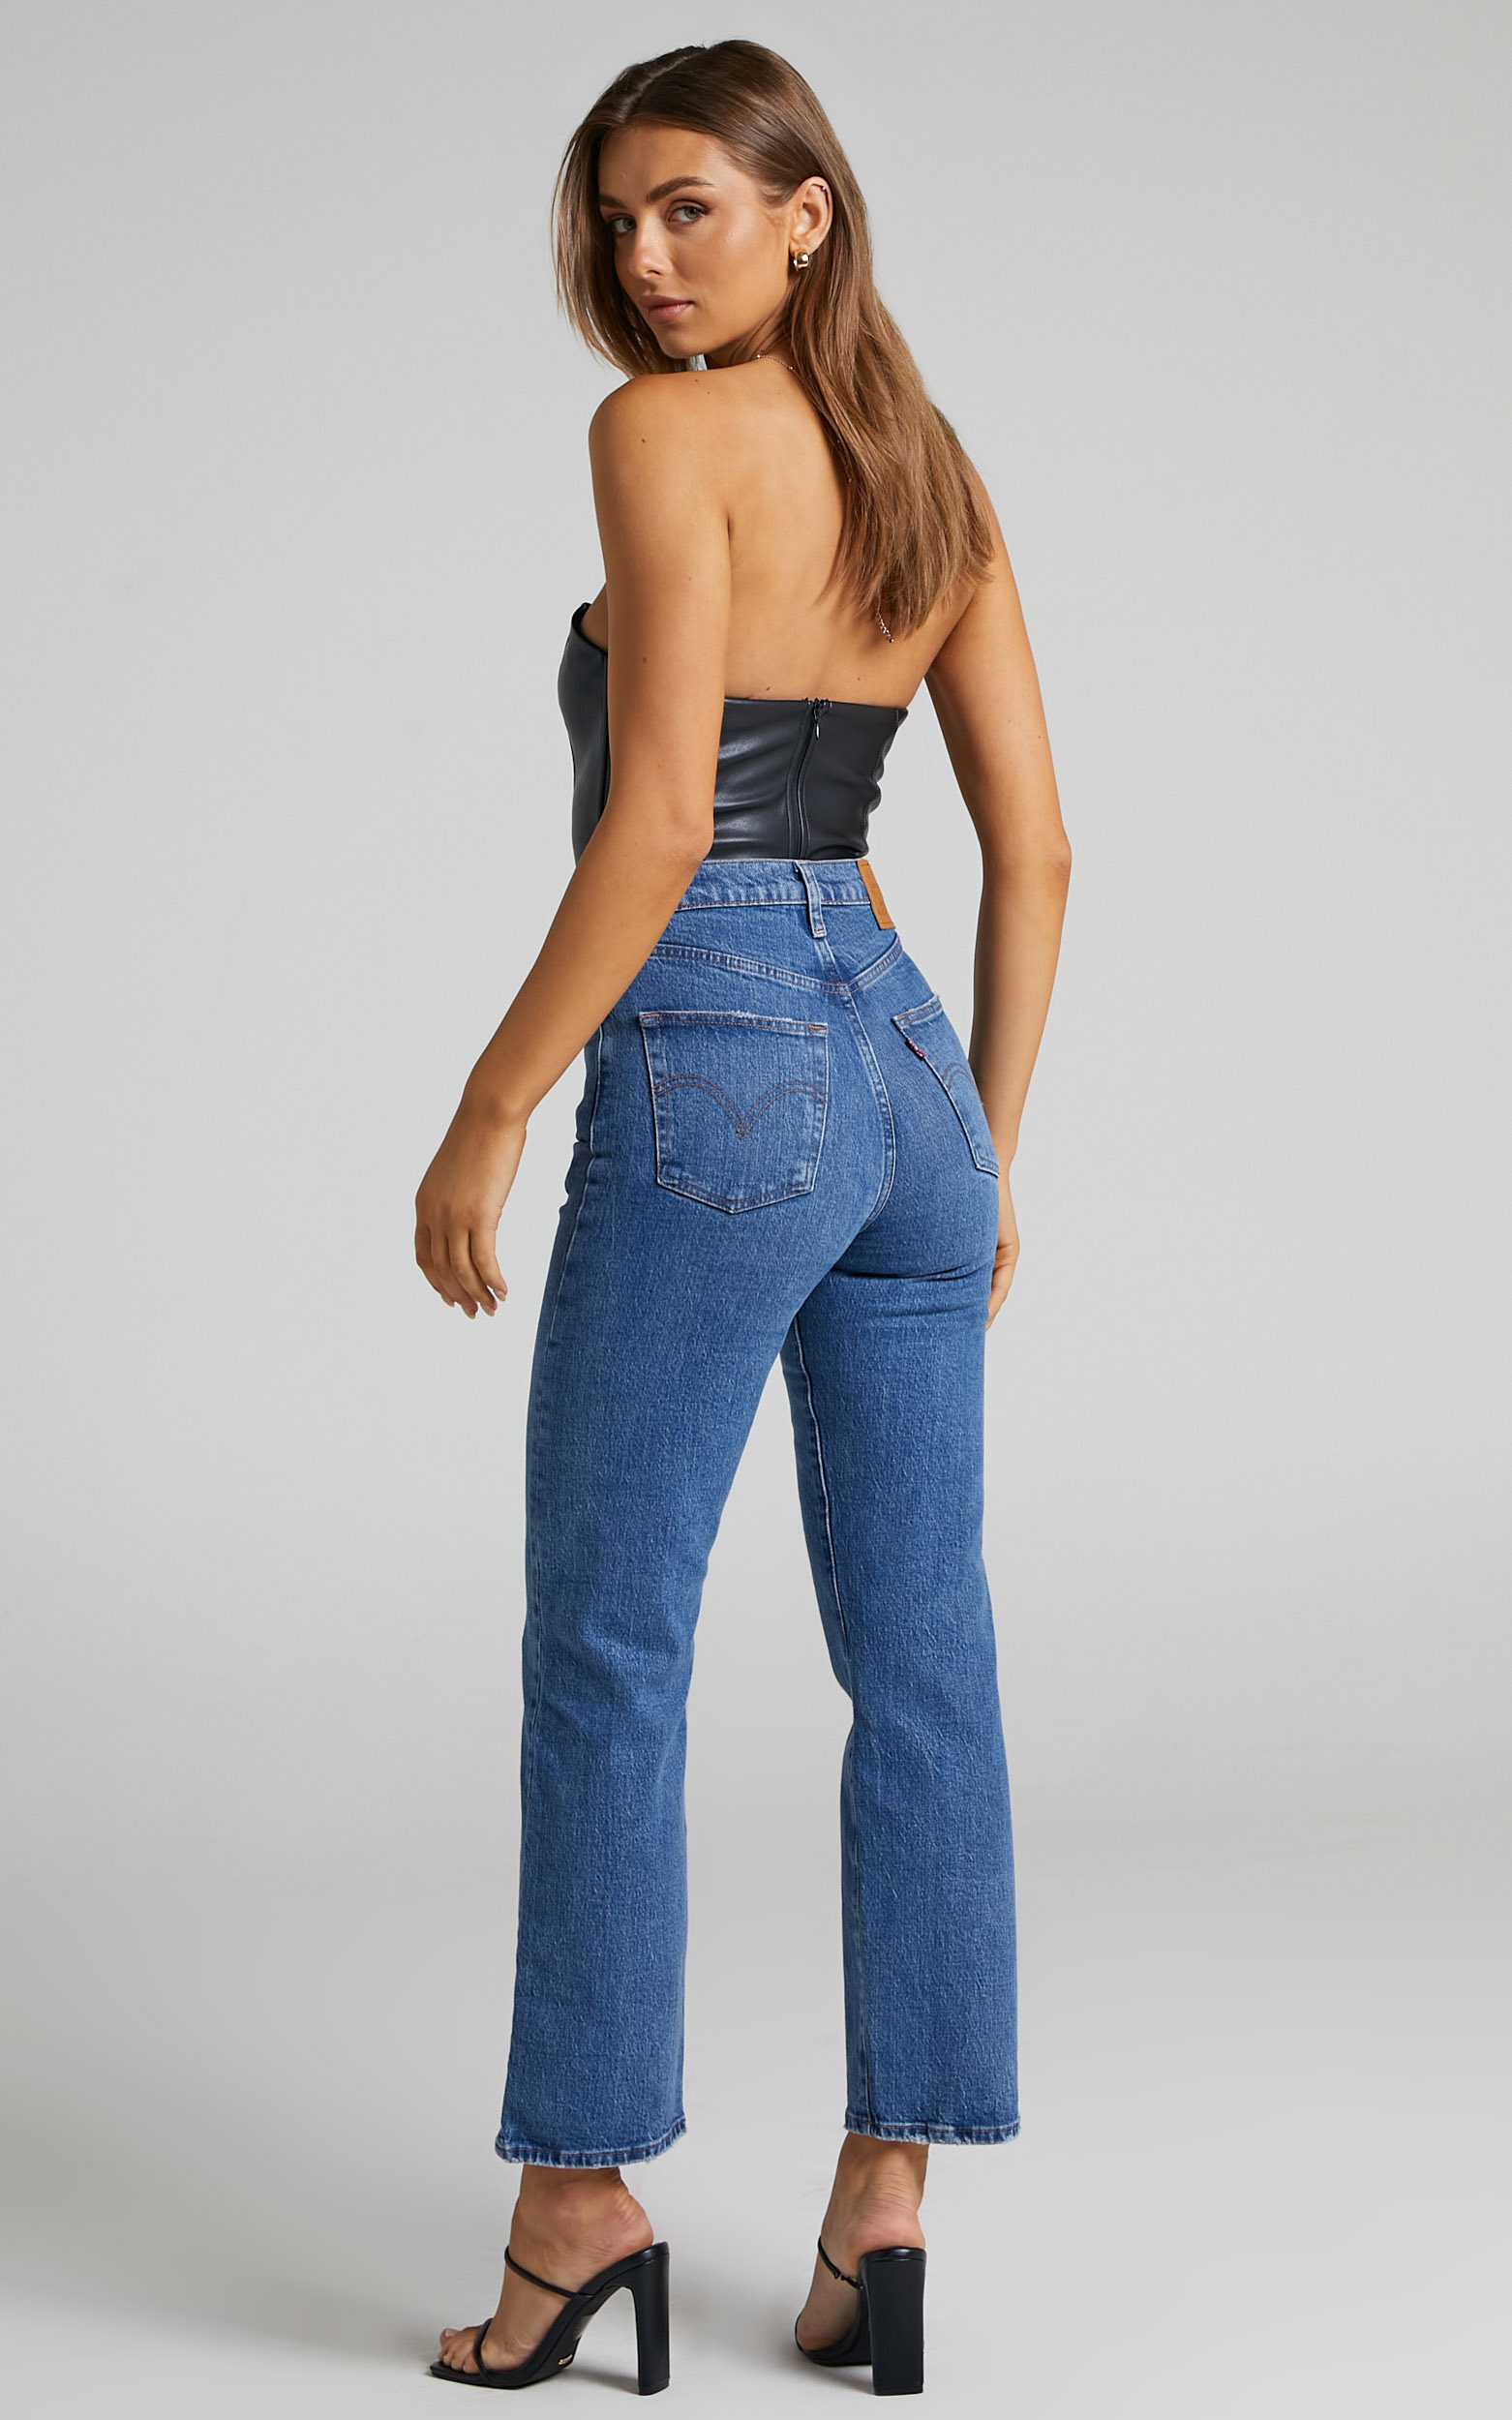 Levi's - High Waisted Ribcage Straight Ankle Jeans in Jazz Jive ...